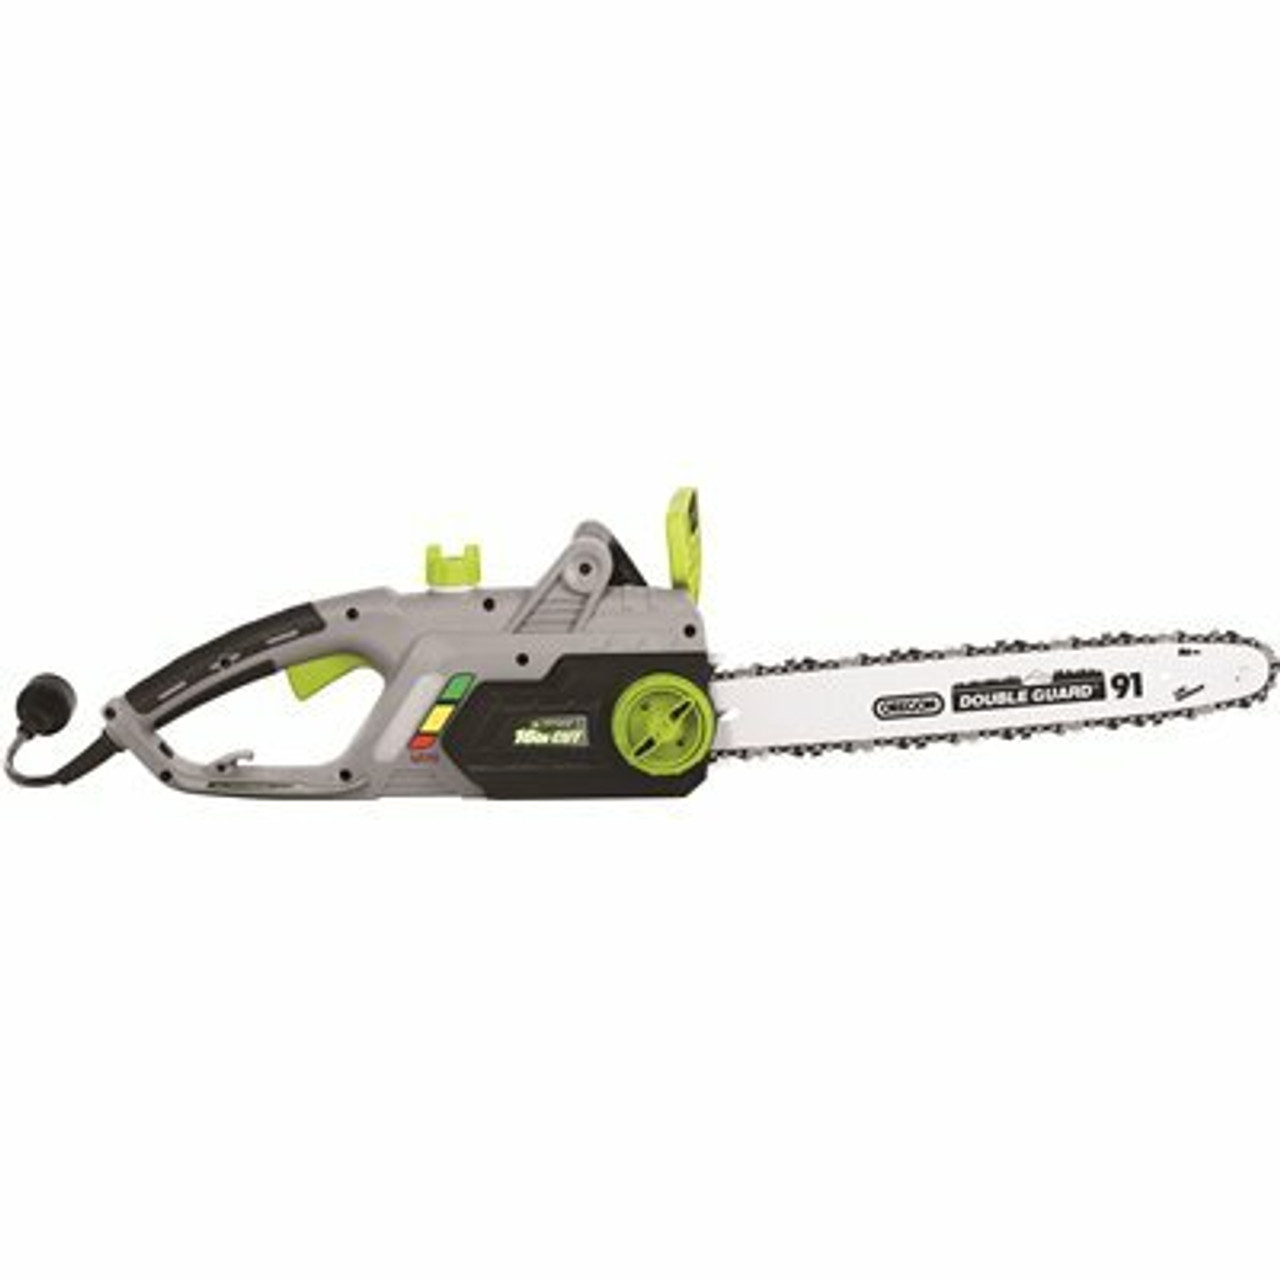 Earthwise 16 In. 12 Amp Electric Chainsaw